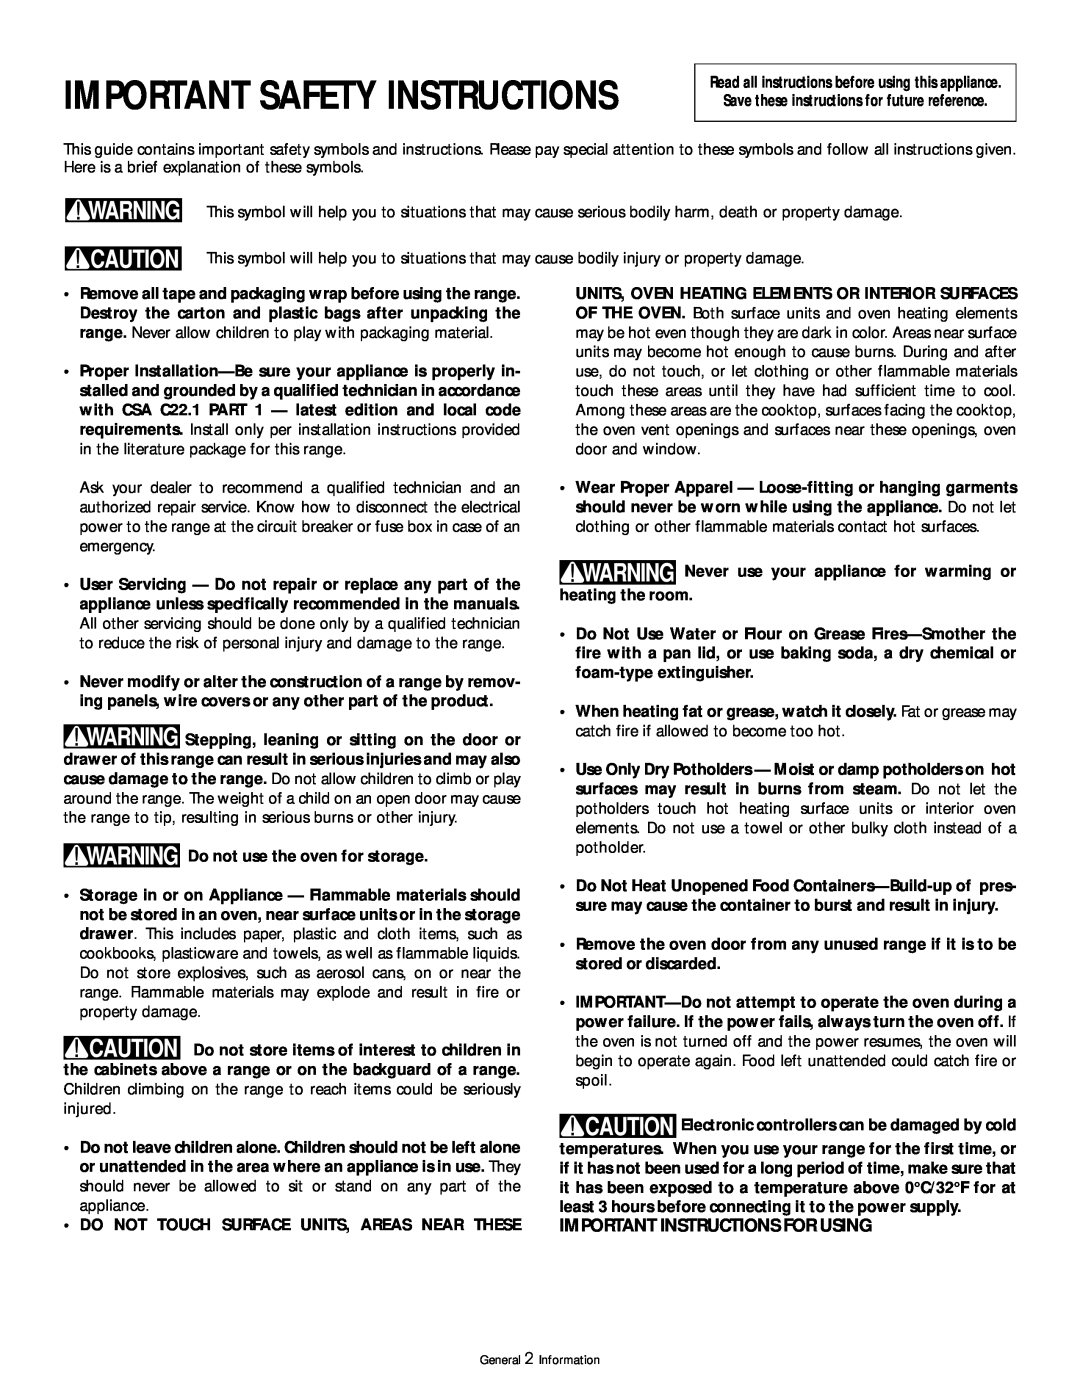 Frigidaire 318200404 Important Instructions For Using, Important Safety Instructions, Do not use the oven for storage 